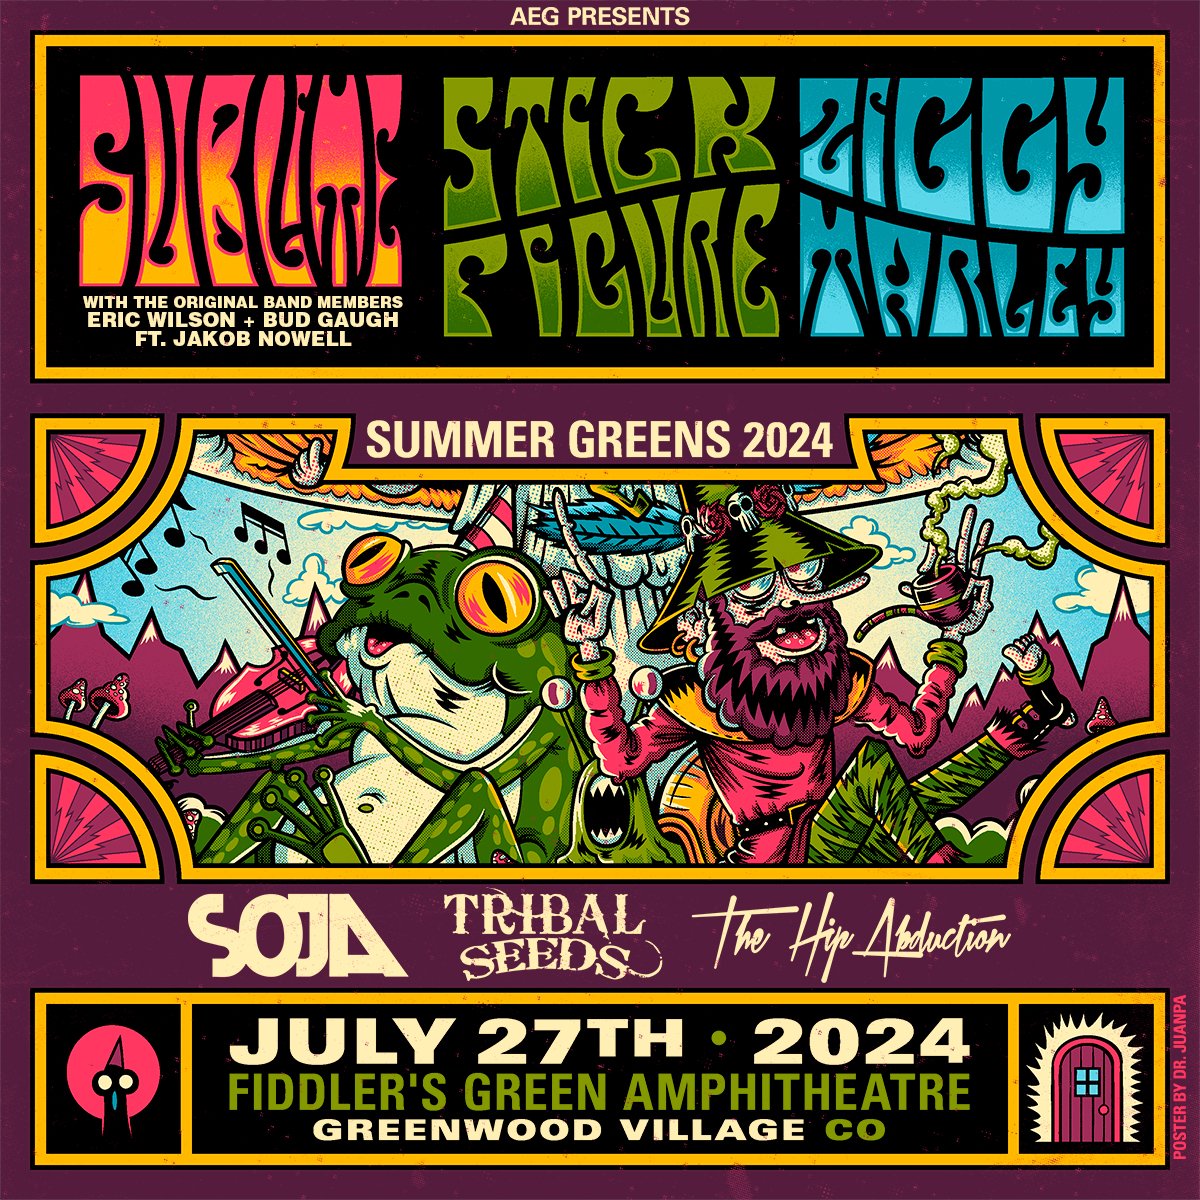 Denver, we haven't seen you since '95, so this one is long overdue! We're coming back to @FiddlersGreenCO for the first time in almost 30 years with our friends @StickFigureDub & @ziggymarley, along with @SOJALive, @TribalSeeds & @thehipabduction. Presale begins Wednesday, April…